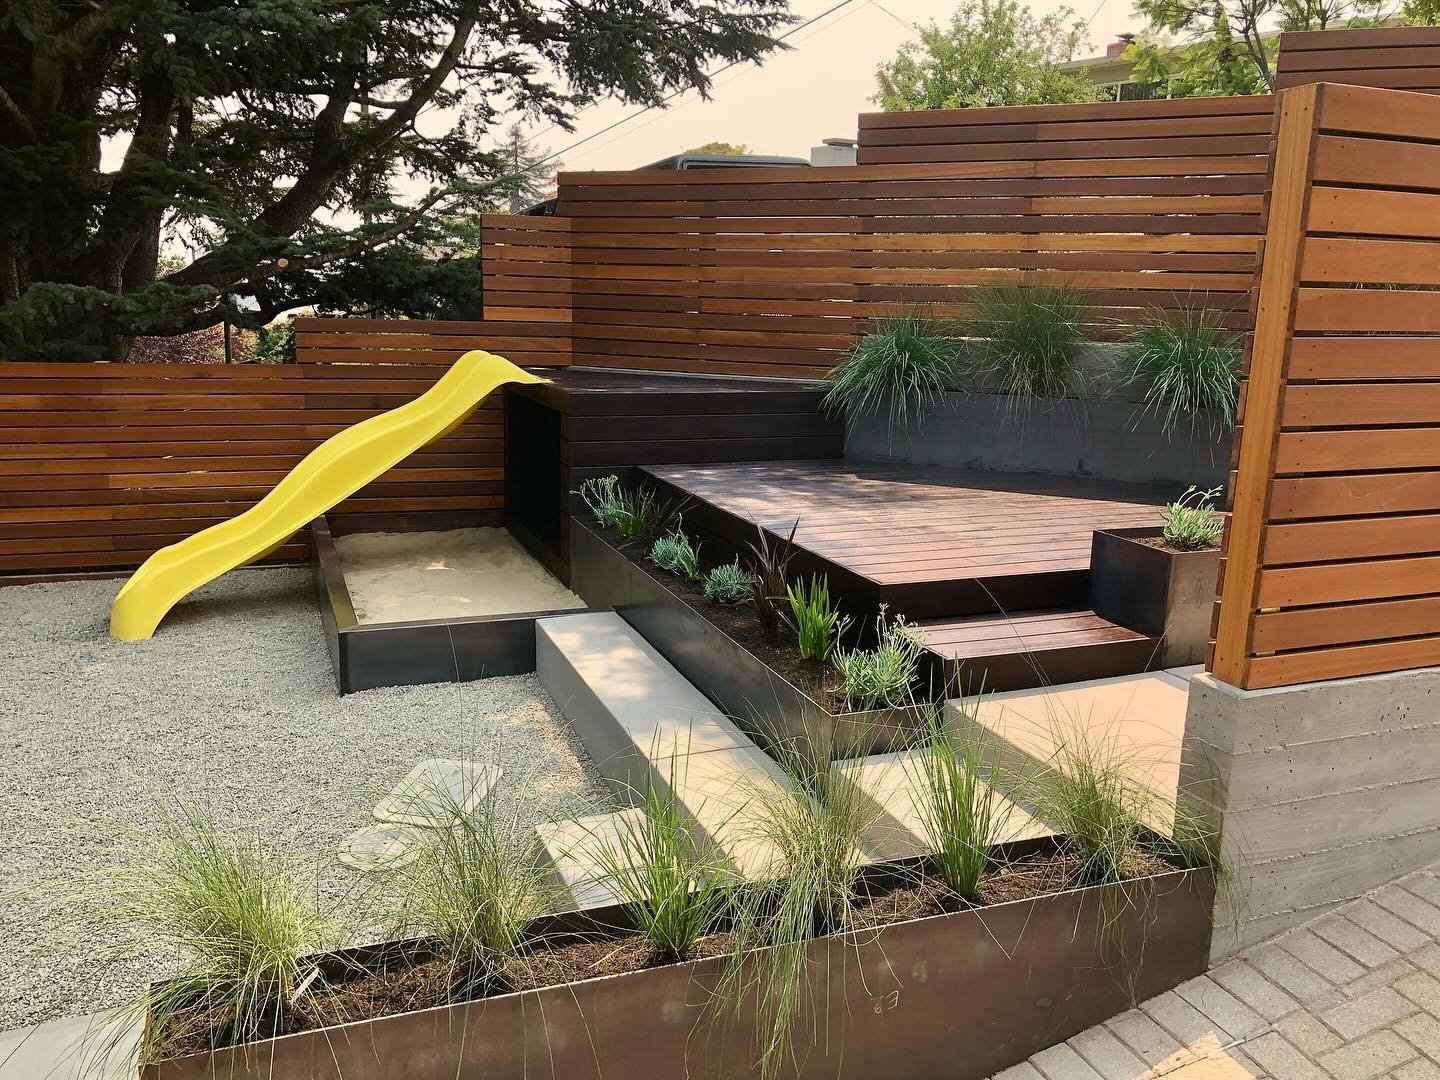 Creating outdoor spaces where memories are made ✨ Amazing result in this family-friendly project 🪵🌱🍄

#familytime #landscapedesign #landscapearchitecture #familyhome #gardendesign #landscapingdesign #landscapingideas #outdoorlifestyle